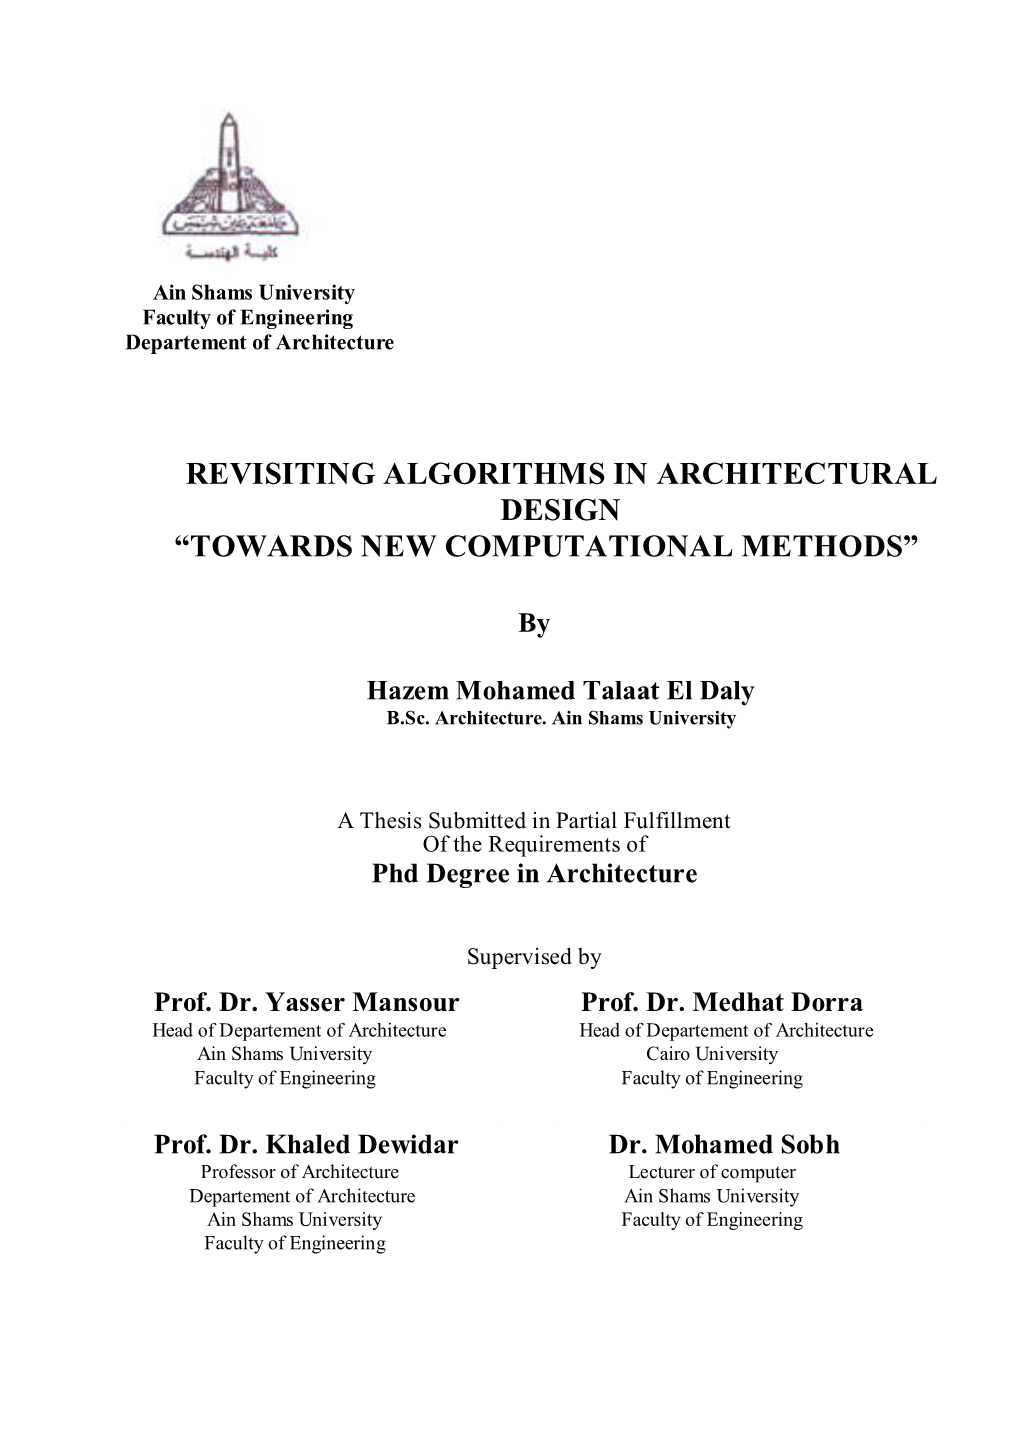 Revisiting Algorithms in Architectural Design “Towards New Computational Methods”